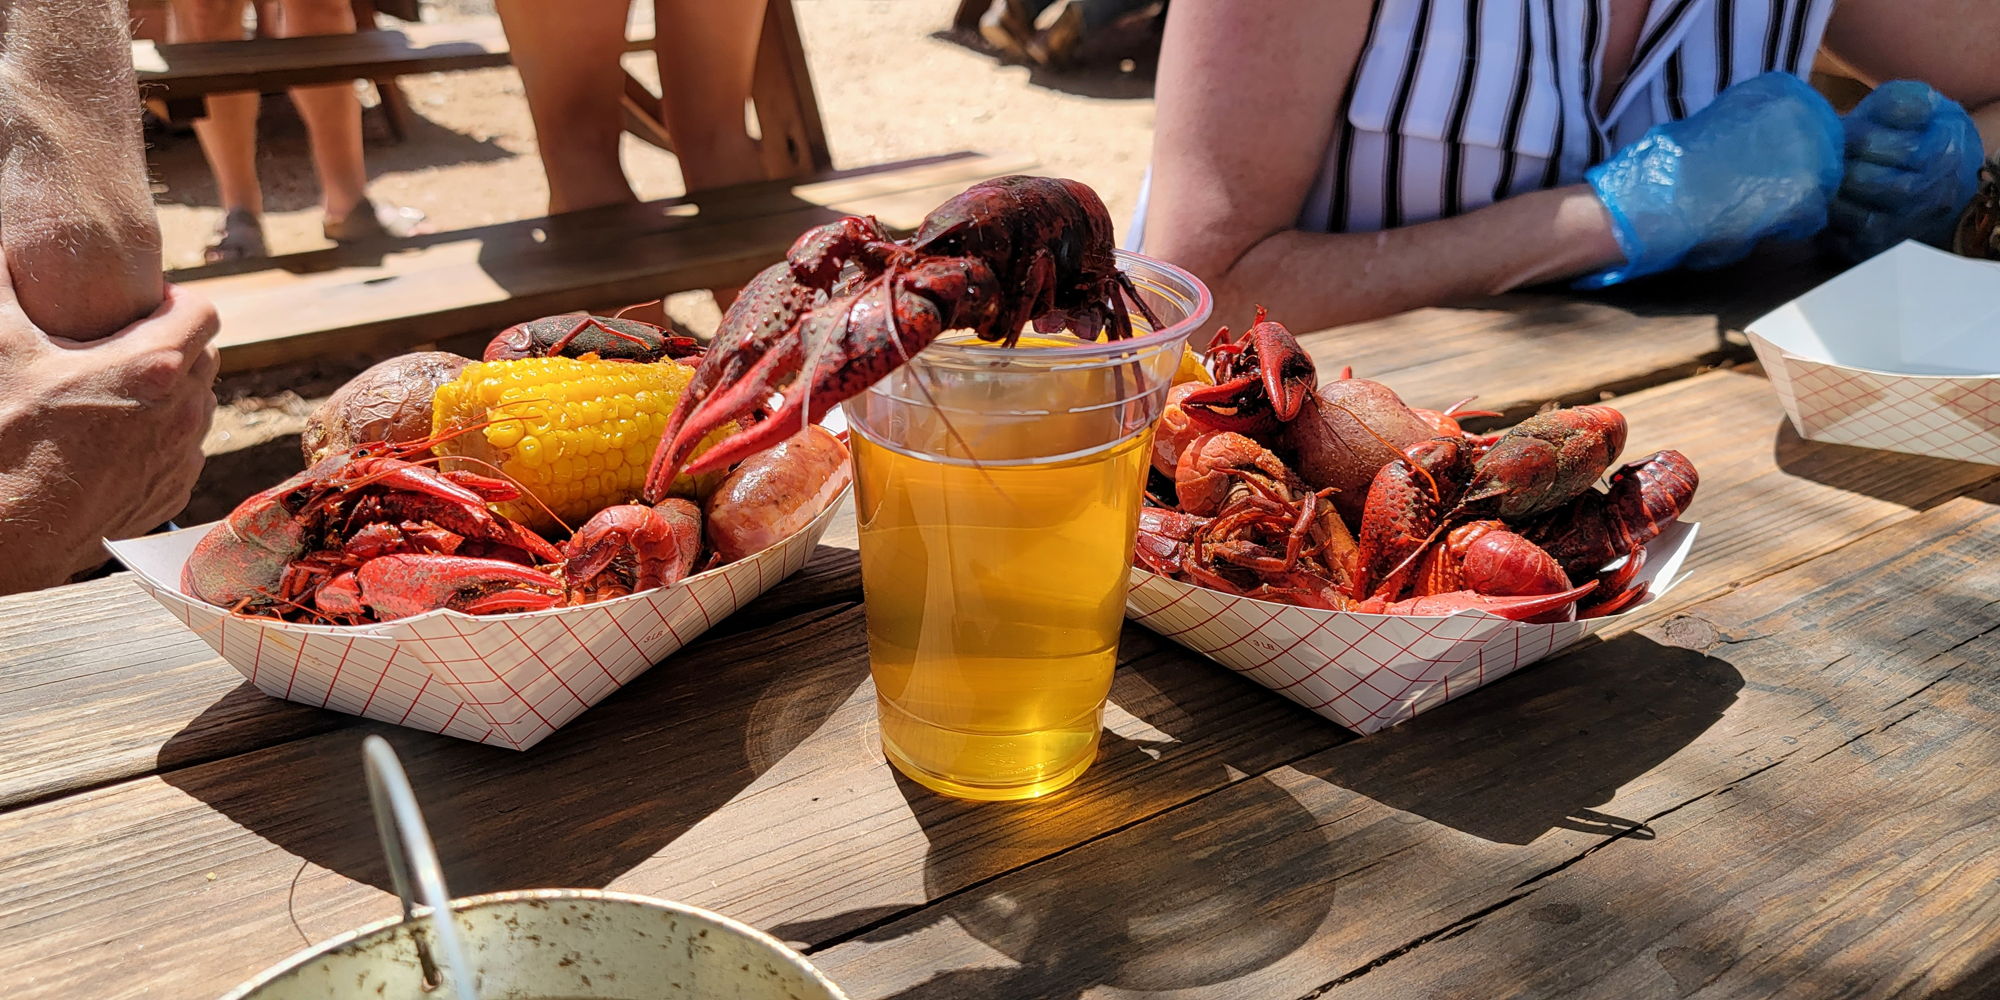 Crawfish, Live Music and Infamous Beer promotional image